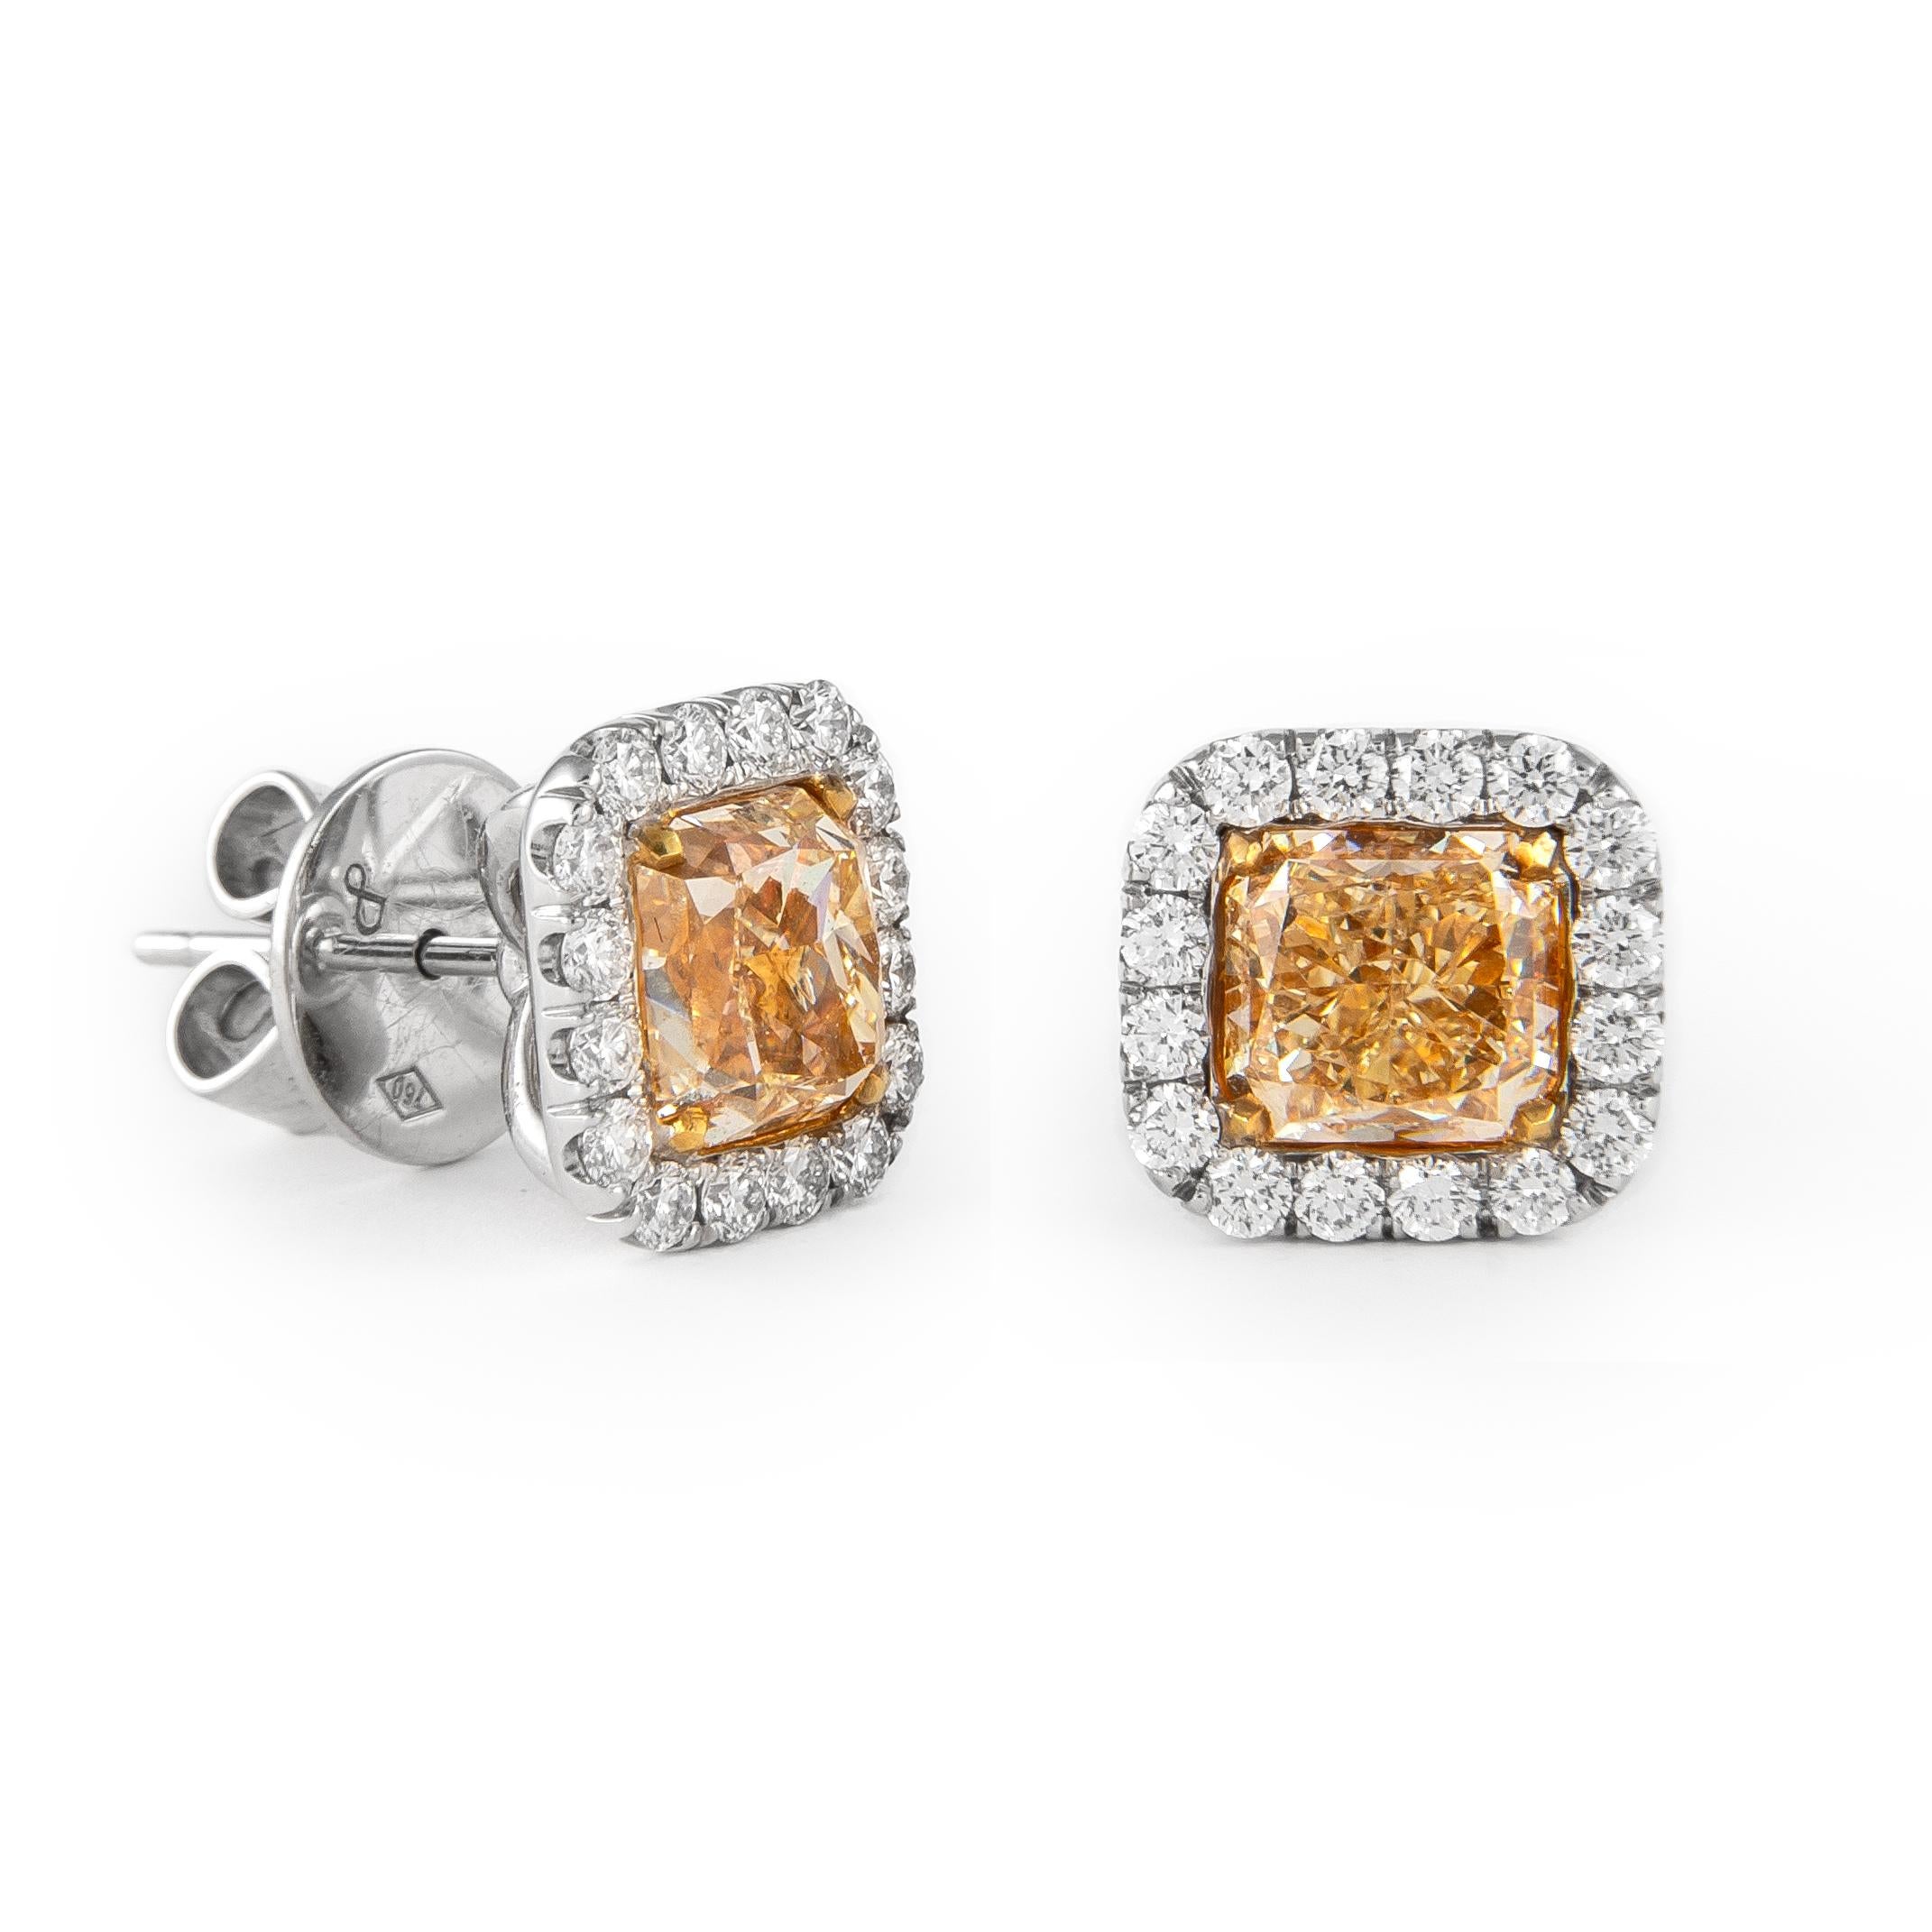 Stunning yellow diamond stud earrings with diamond halo. High jewelry by Alexander Beverly Hills.  
4.55 carats total diamond weight.
2 radiant cut diamonds, 3.88 carats. Approximately Fancy Yellow color and SI1 clarity. Complimented by 32 round